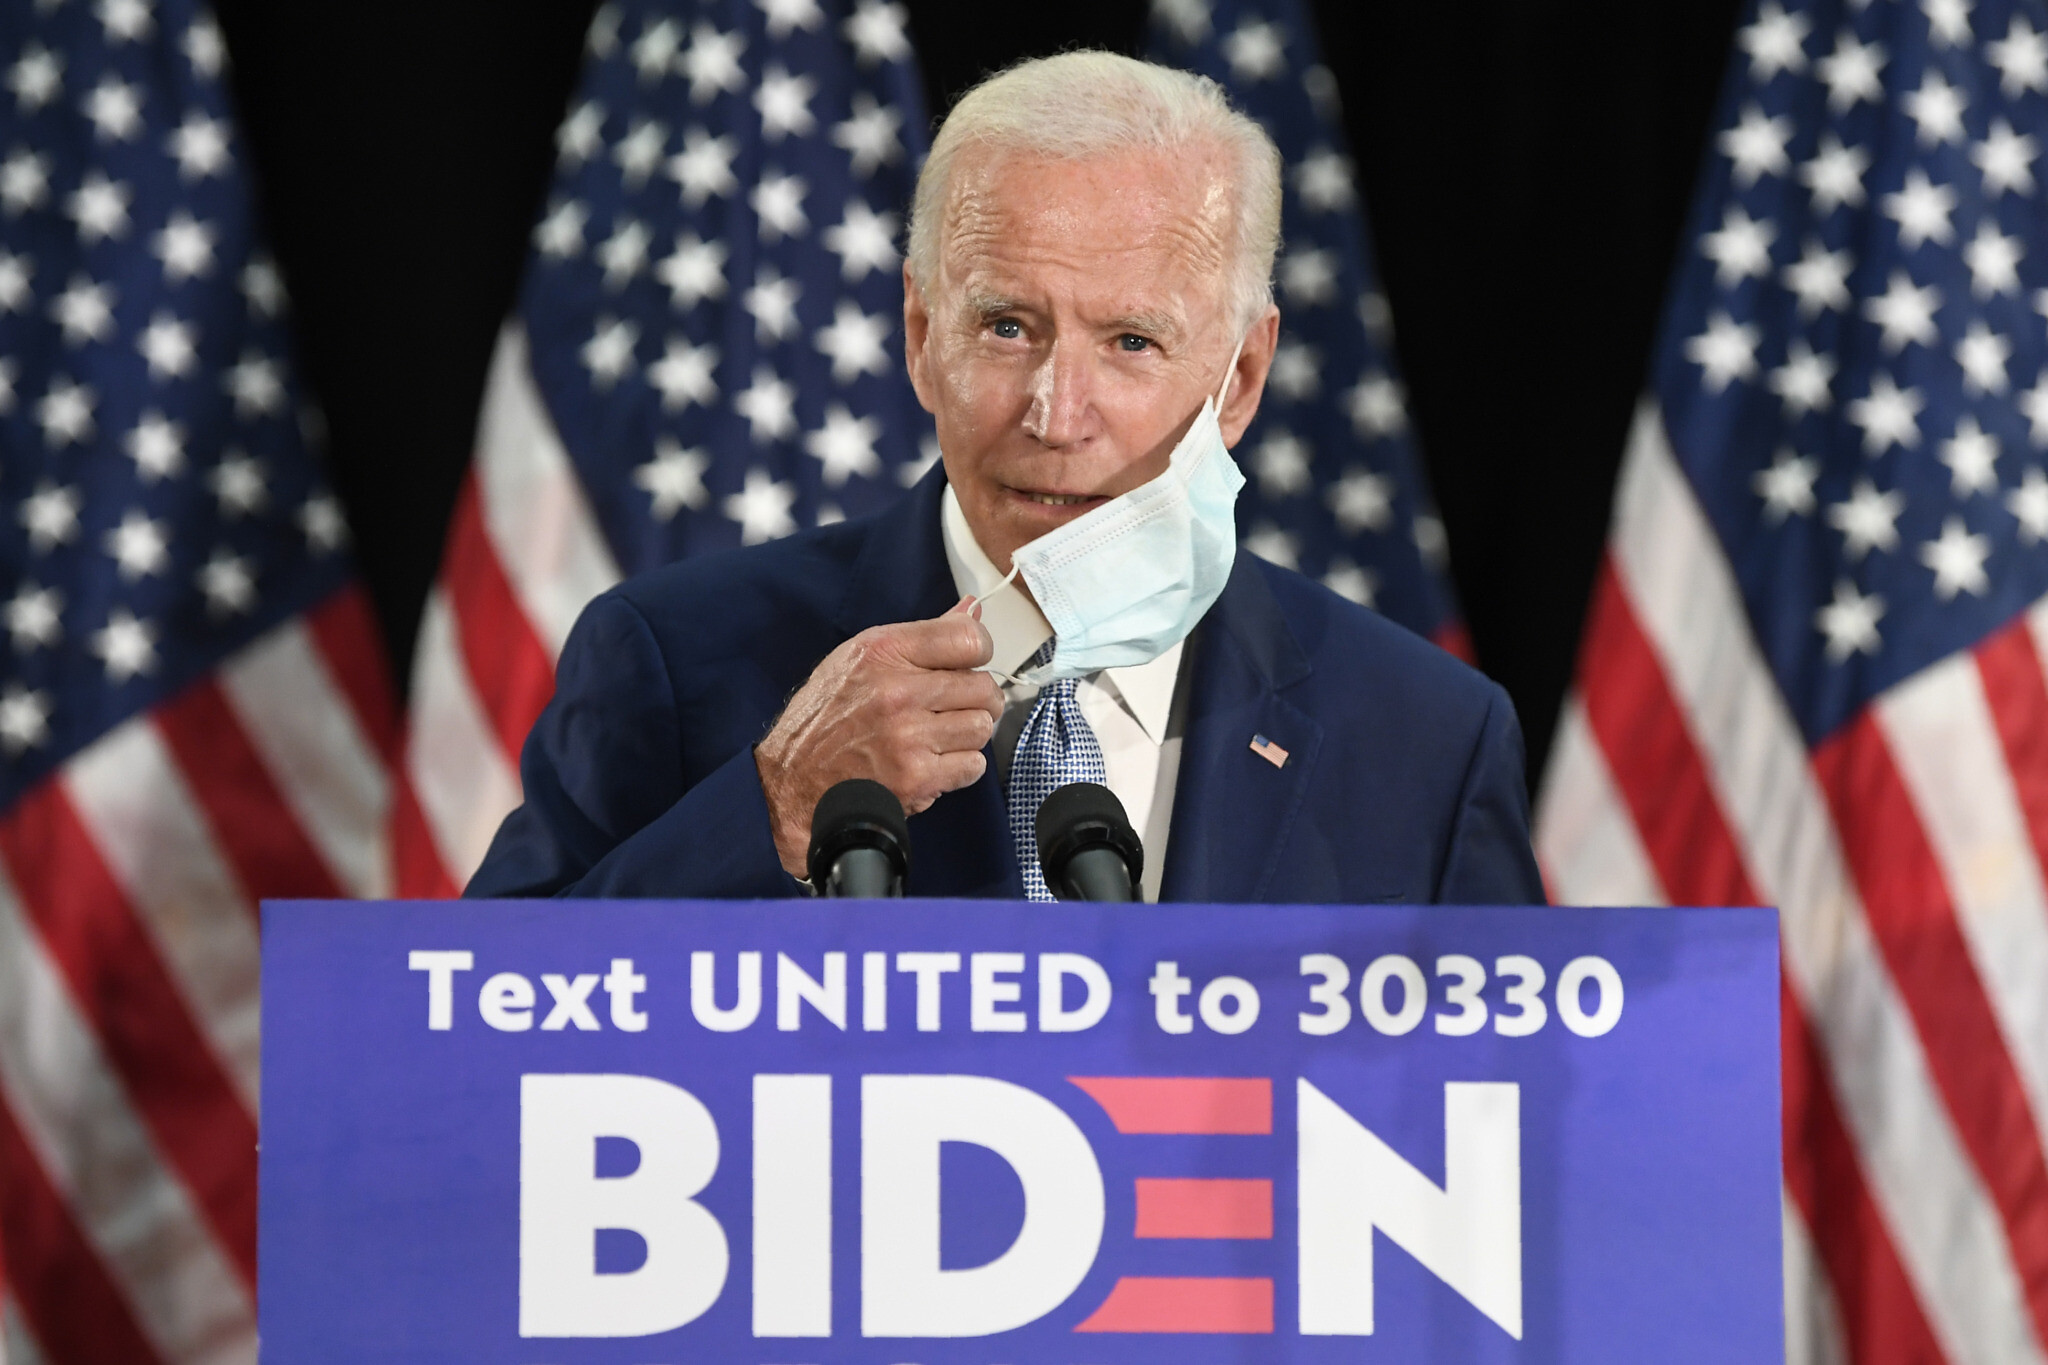 Palestinian Americans Said Unable To Get Biden To Sharpen Tone